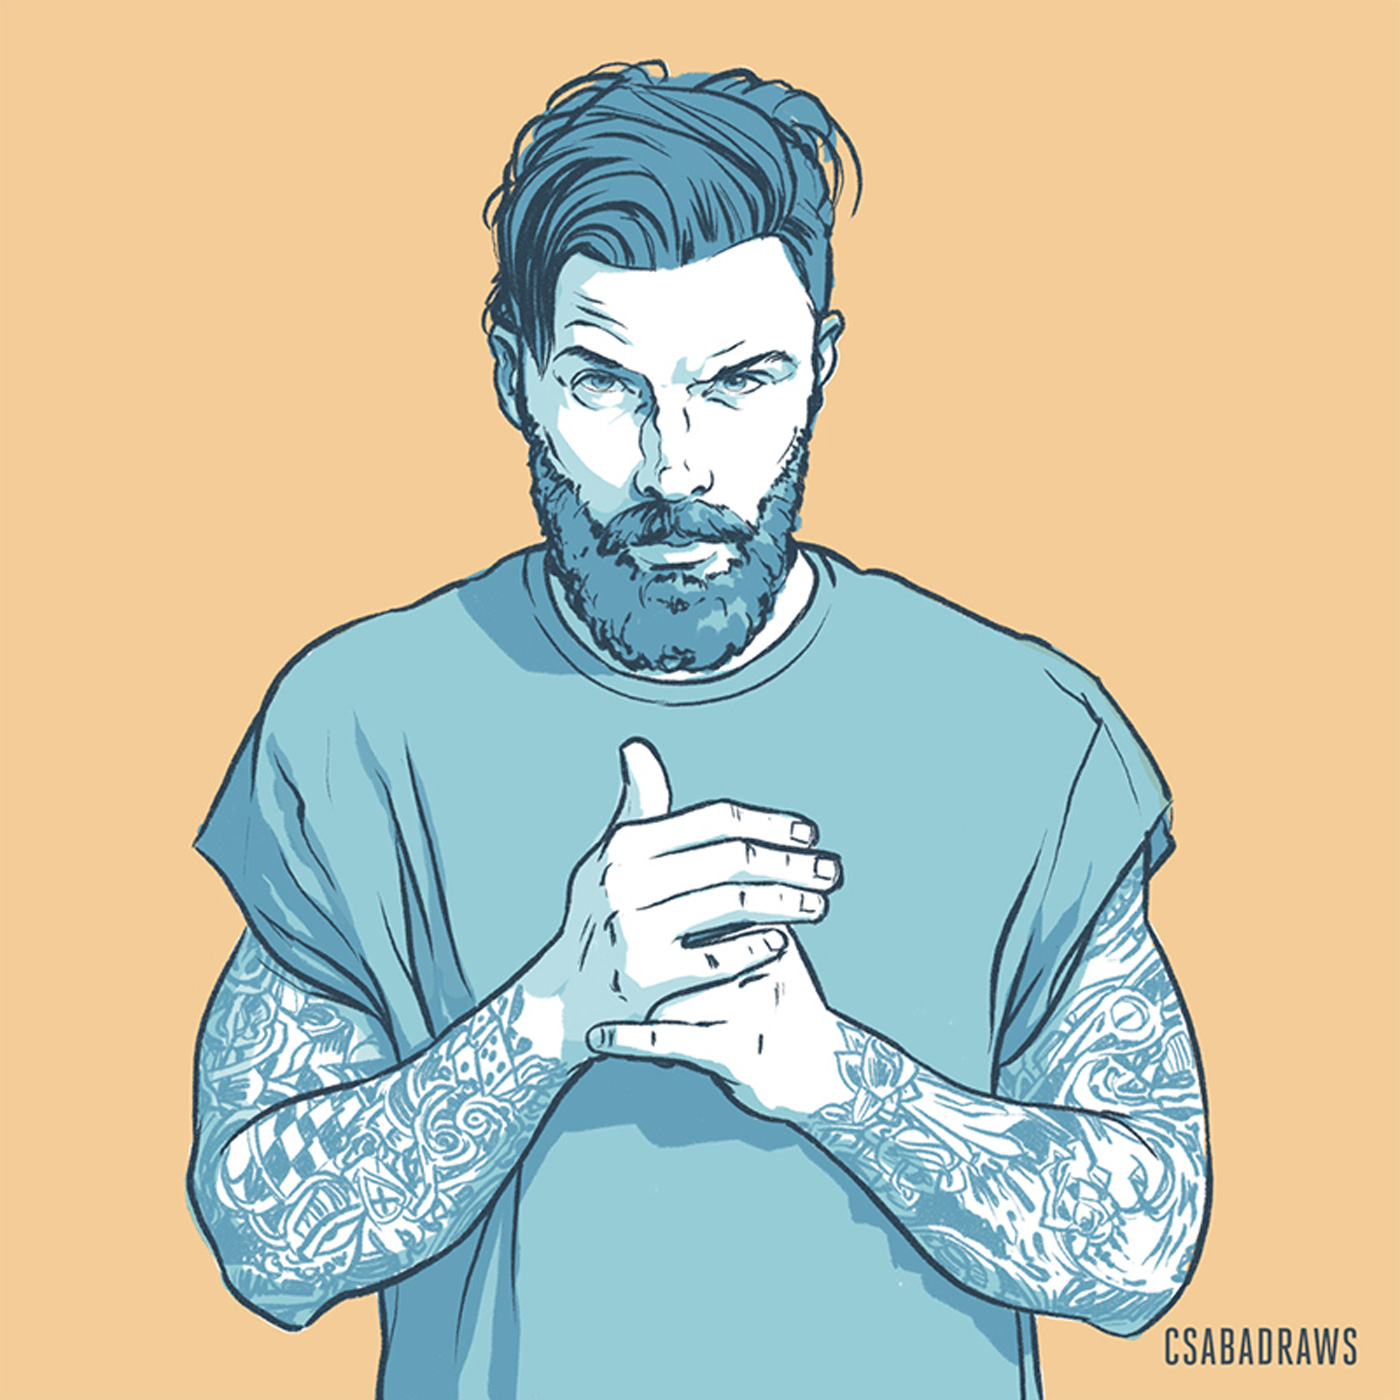 Drawing of a Guy With Tattoo and Beard